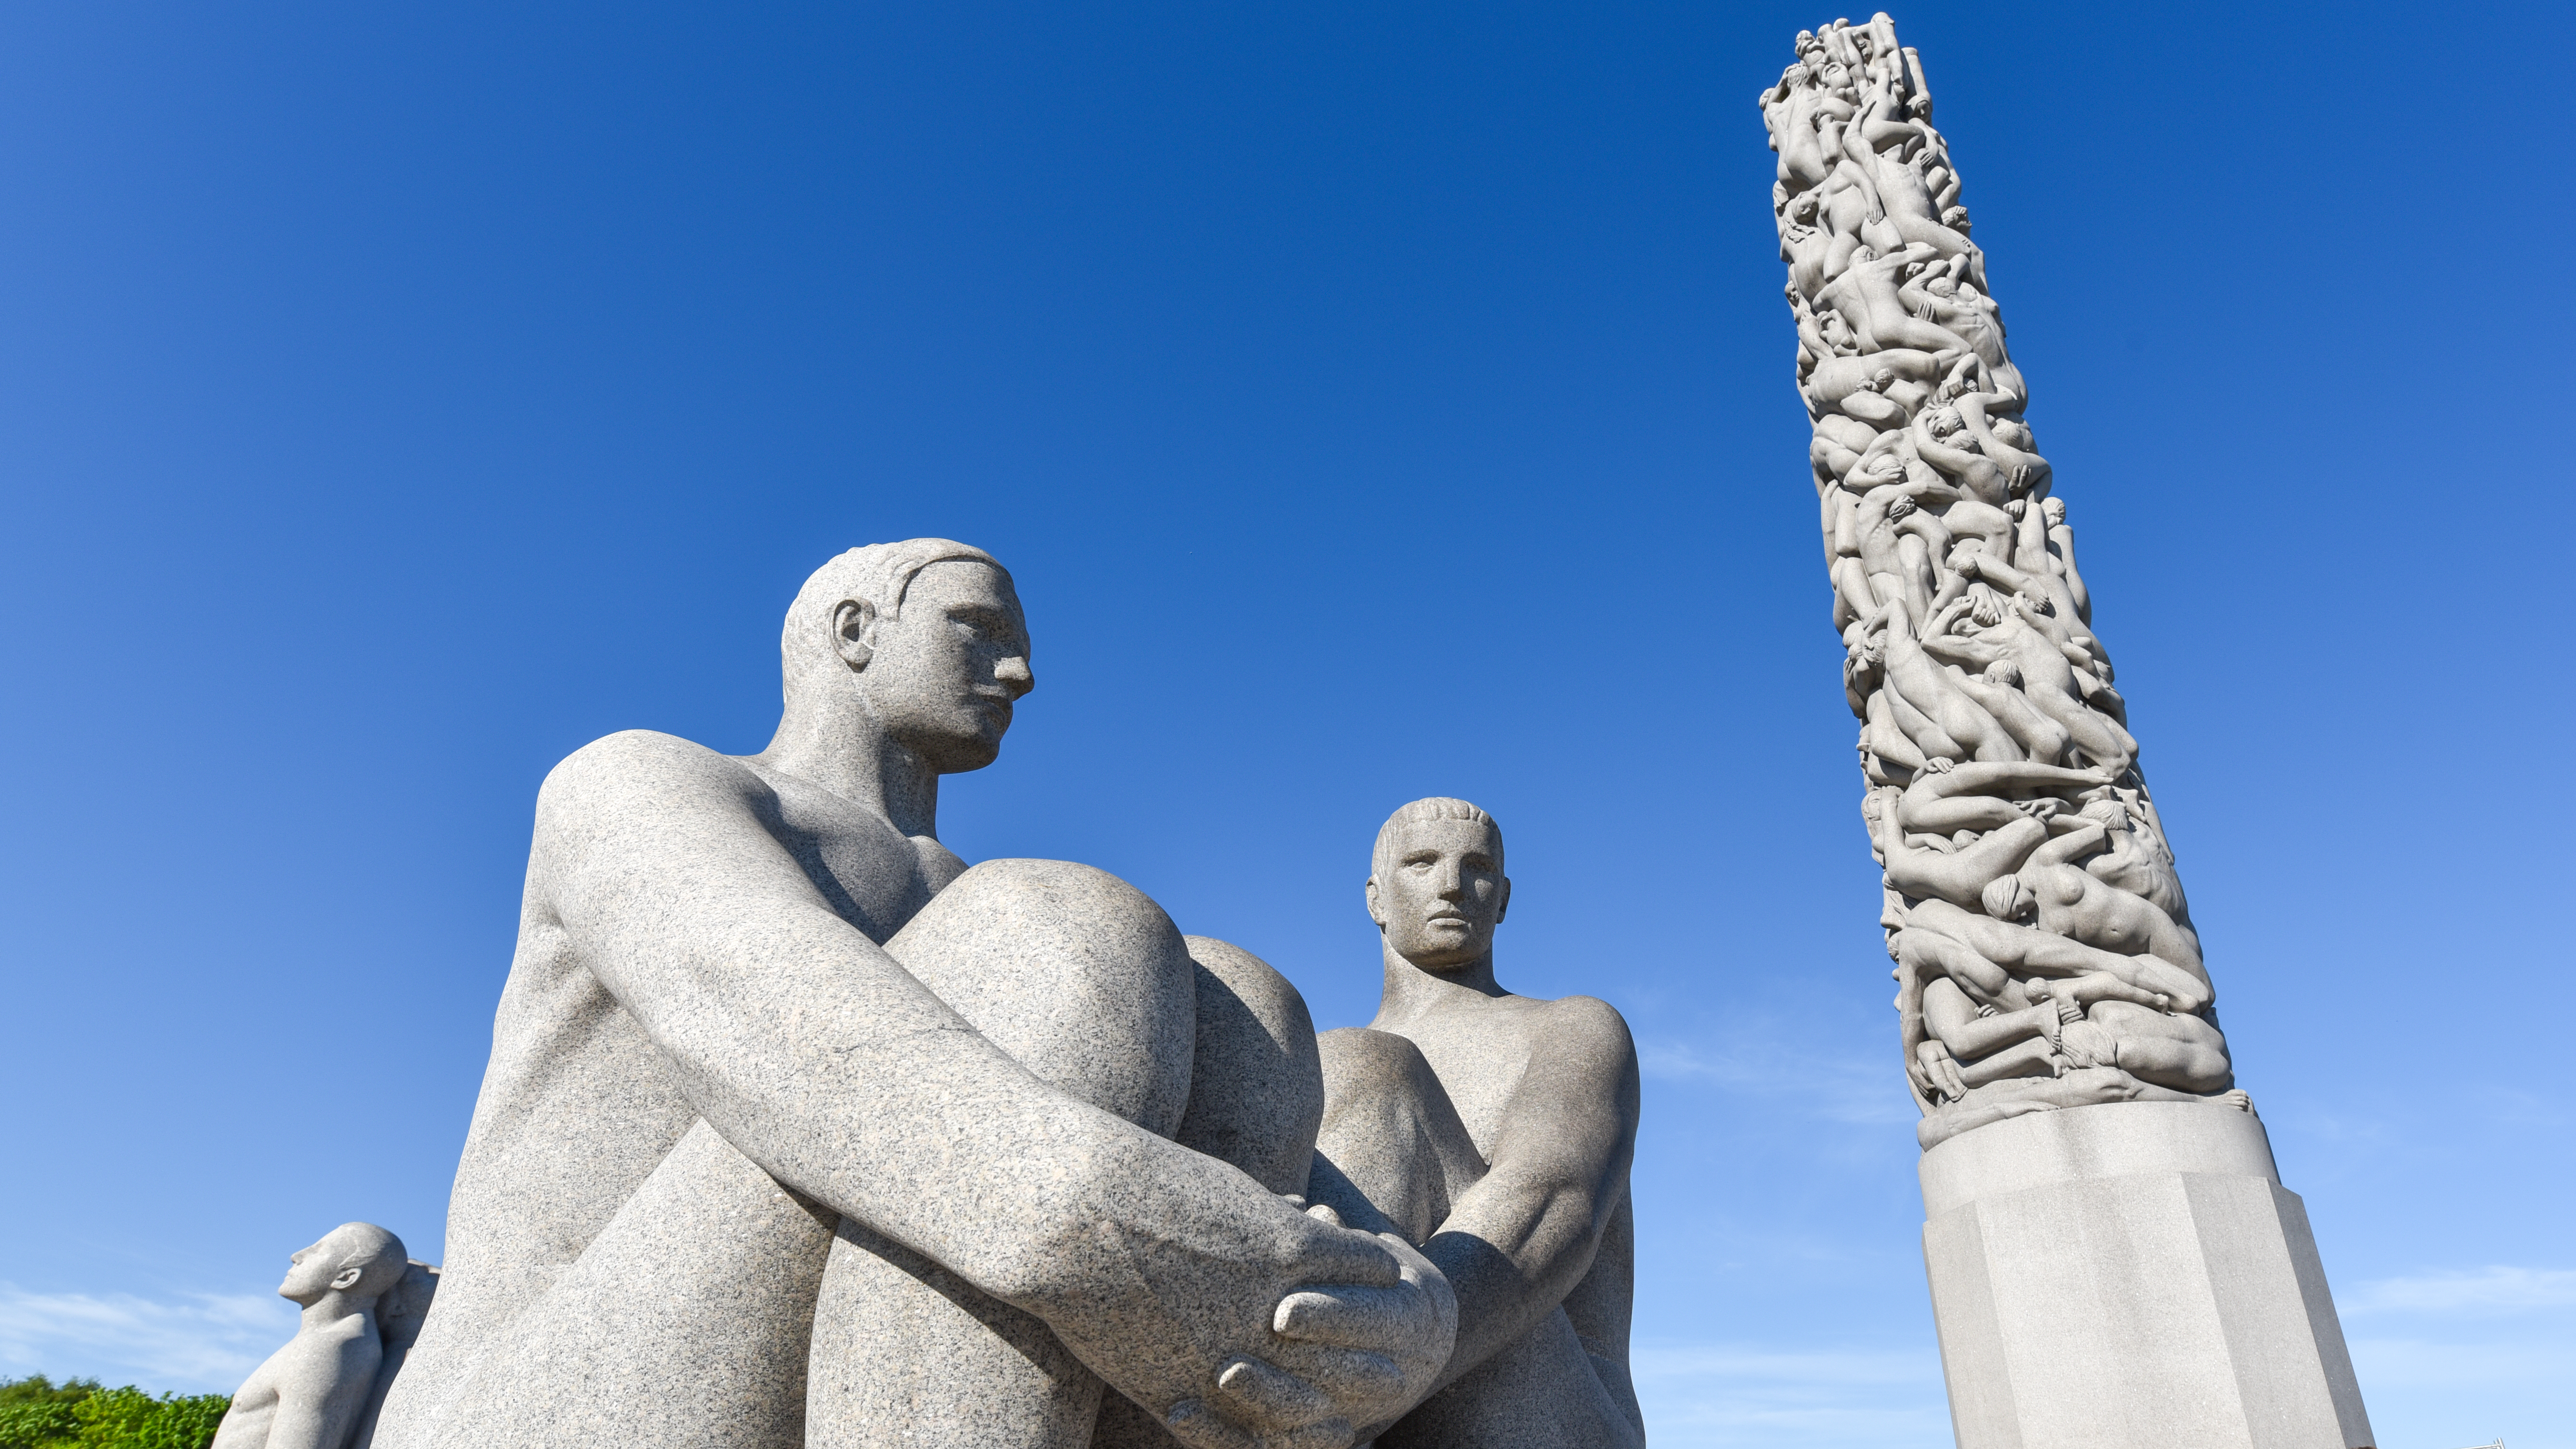 Art of the 20th Century: Gustav Vigeland’s Monolith of Live (1924-1943) and other sculptures in Vigeland Park, Oslo, Norway. Photo credit: Rick Steves' Europe.